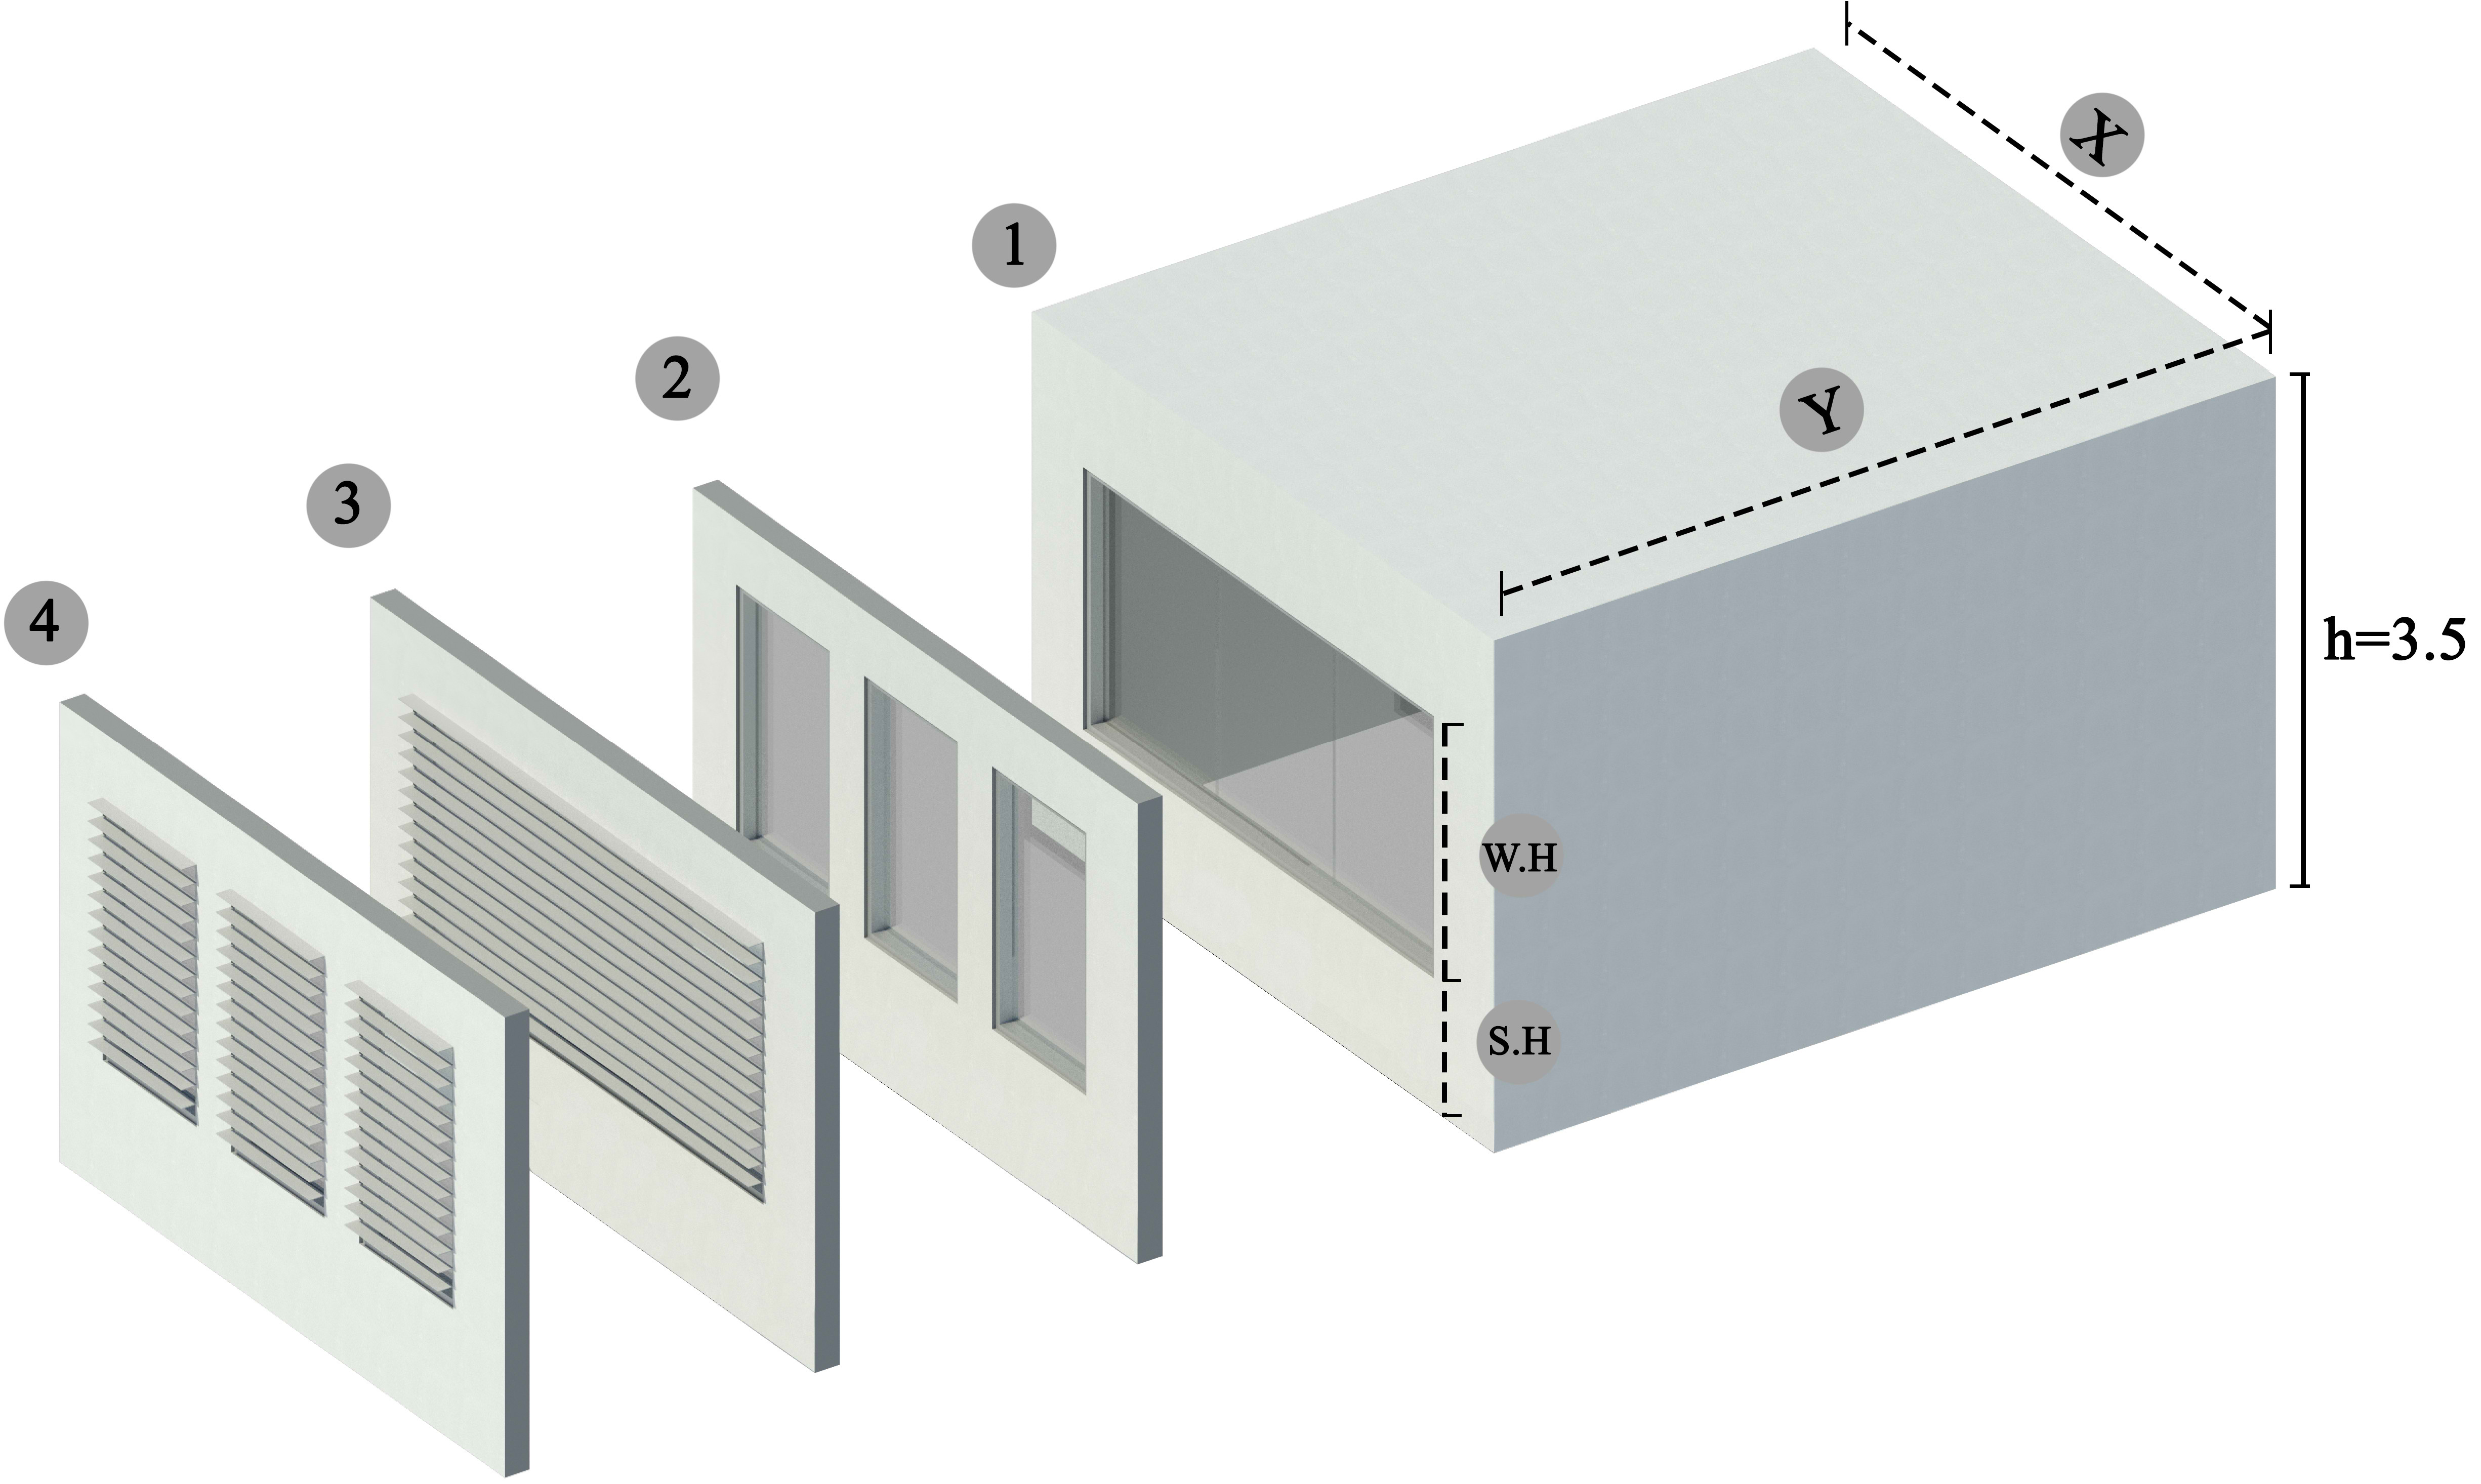 The shoebox space form. Dimensional Alternatives include room width and length, window height (W.H) and window sill height (S.H).